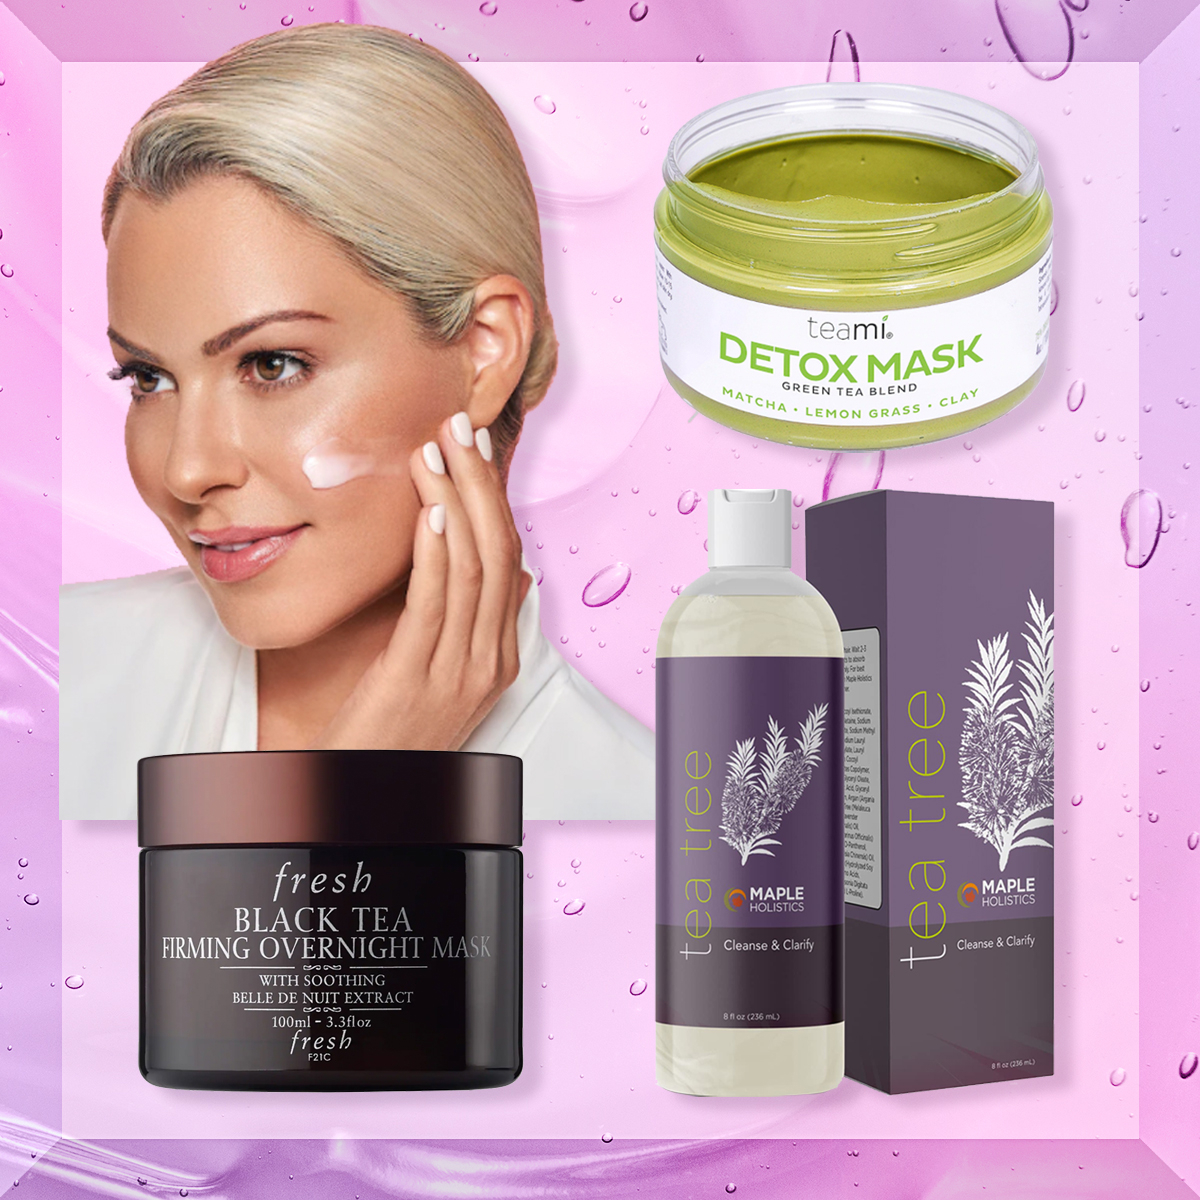 Hurry! You Can Now Shop Maryse's Knockout Moisturizer at Ulta